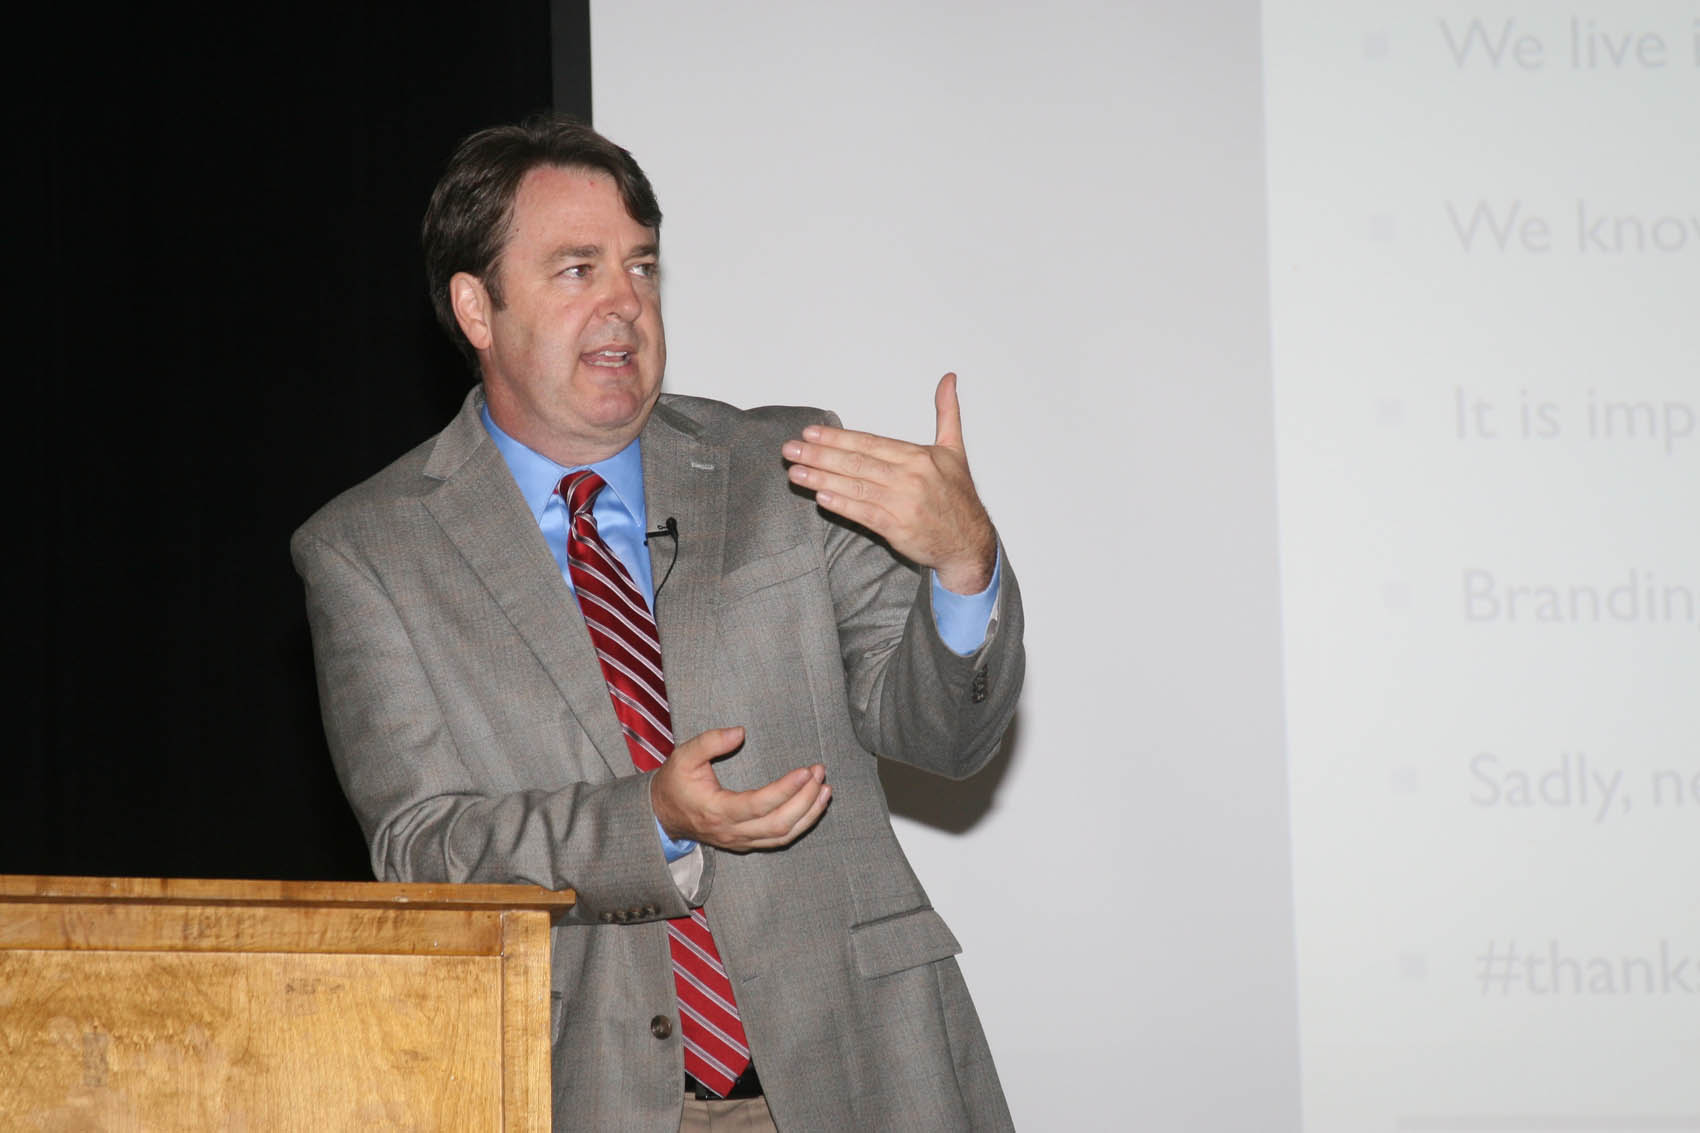 Liberty Lecture Series program features 'Politics and Media'